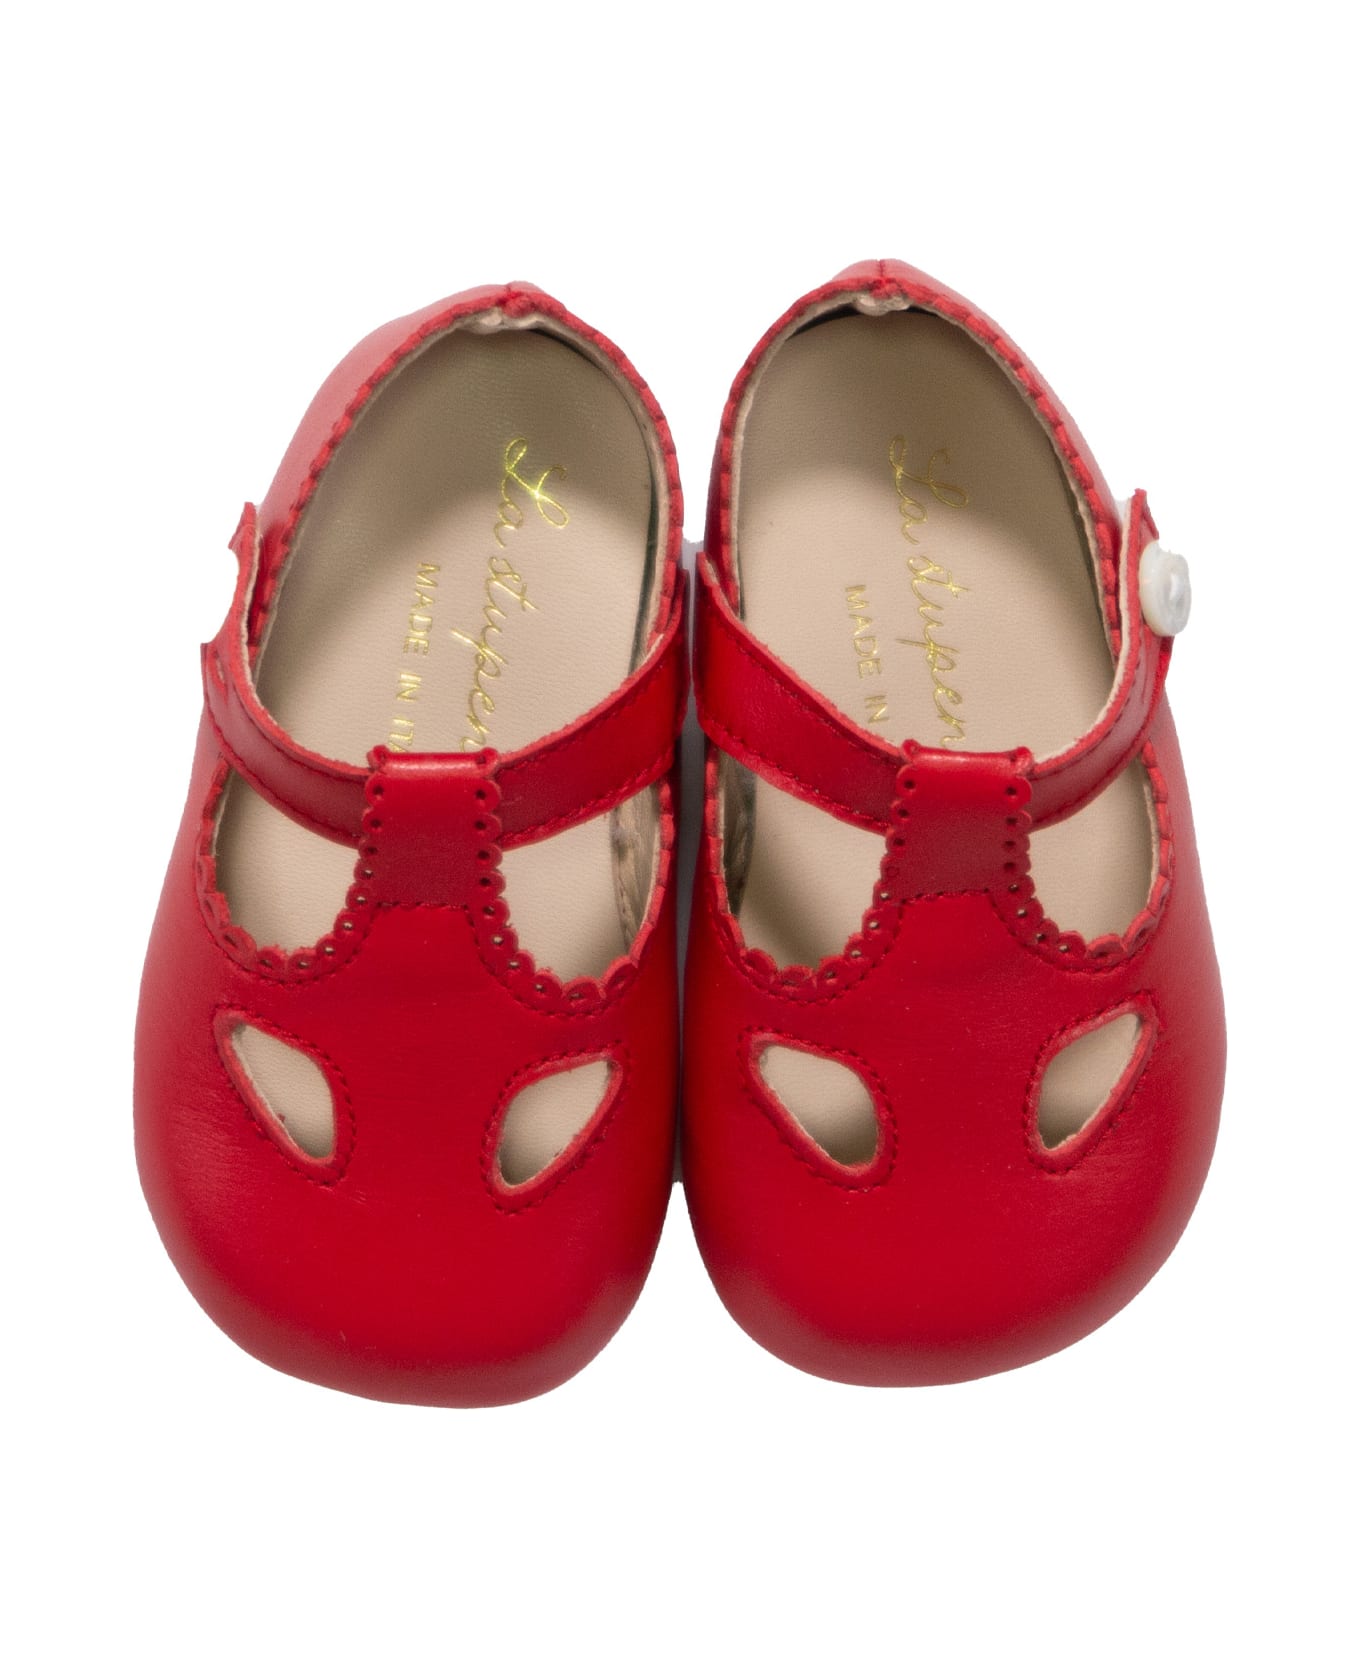 La stupenderia Leather Shoes - Red